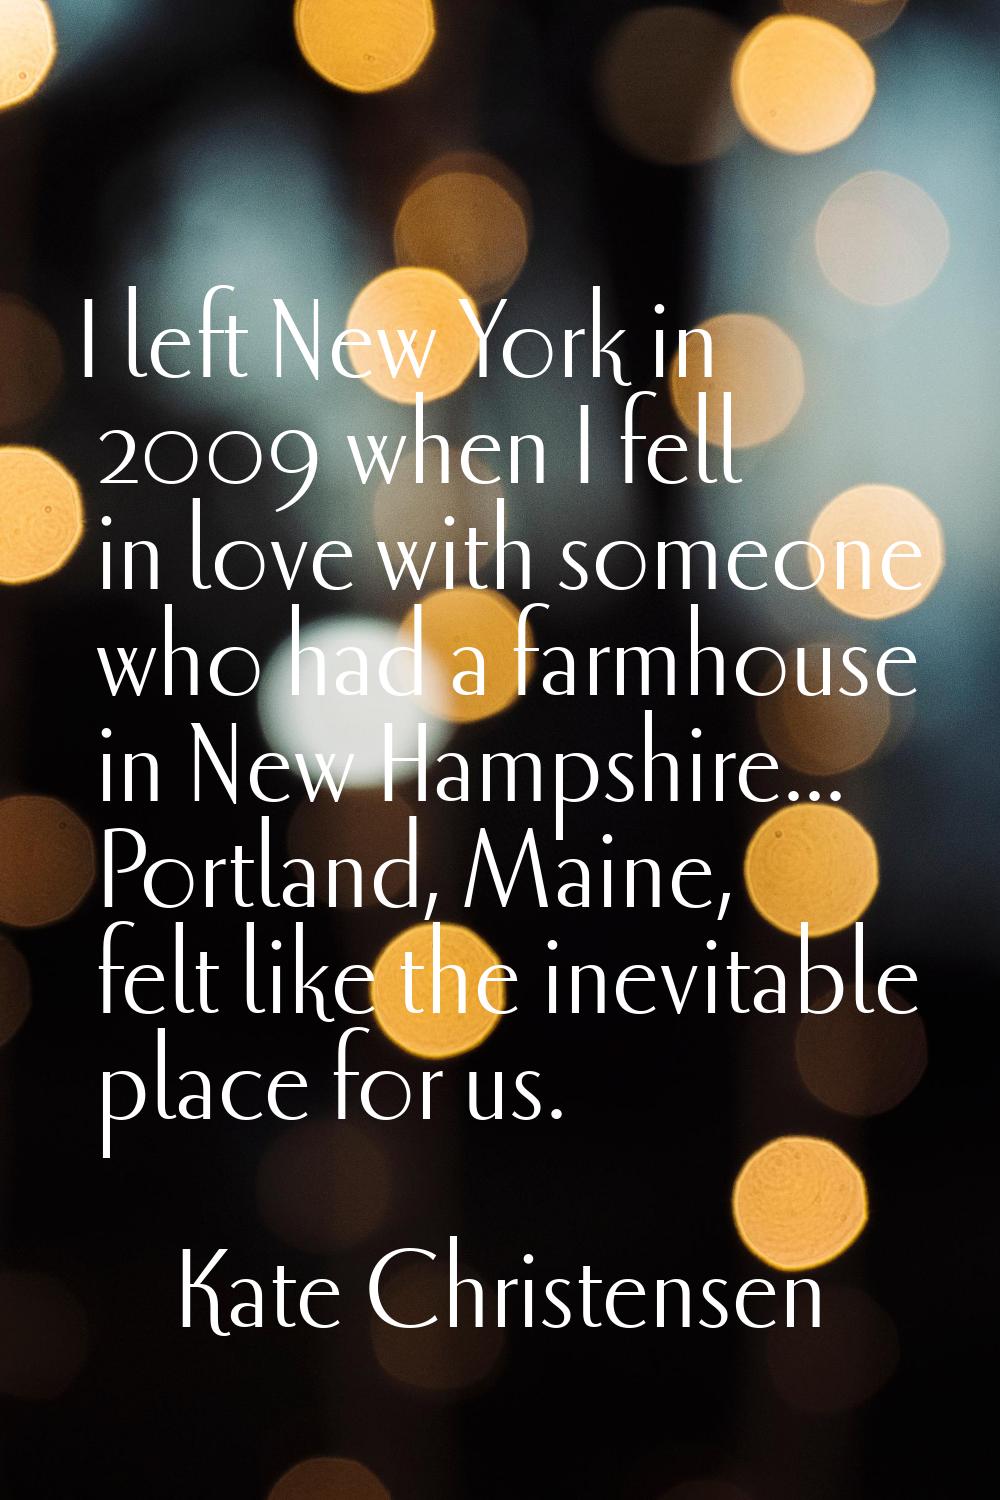 I left New York in 2009 when I fell in love with someone who had a farmhouse in New Hampshire... Po